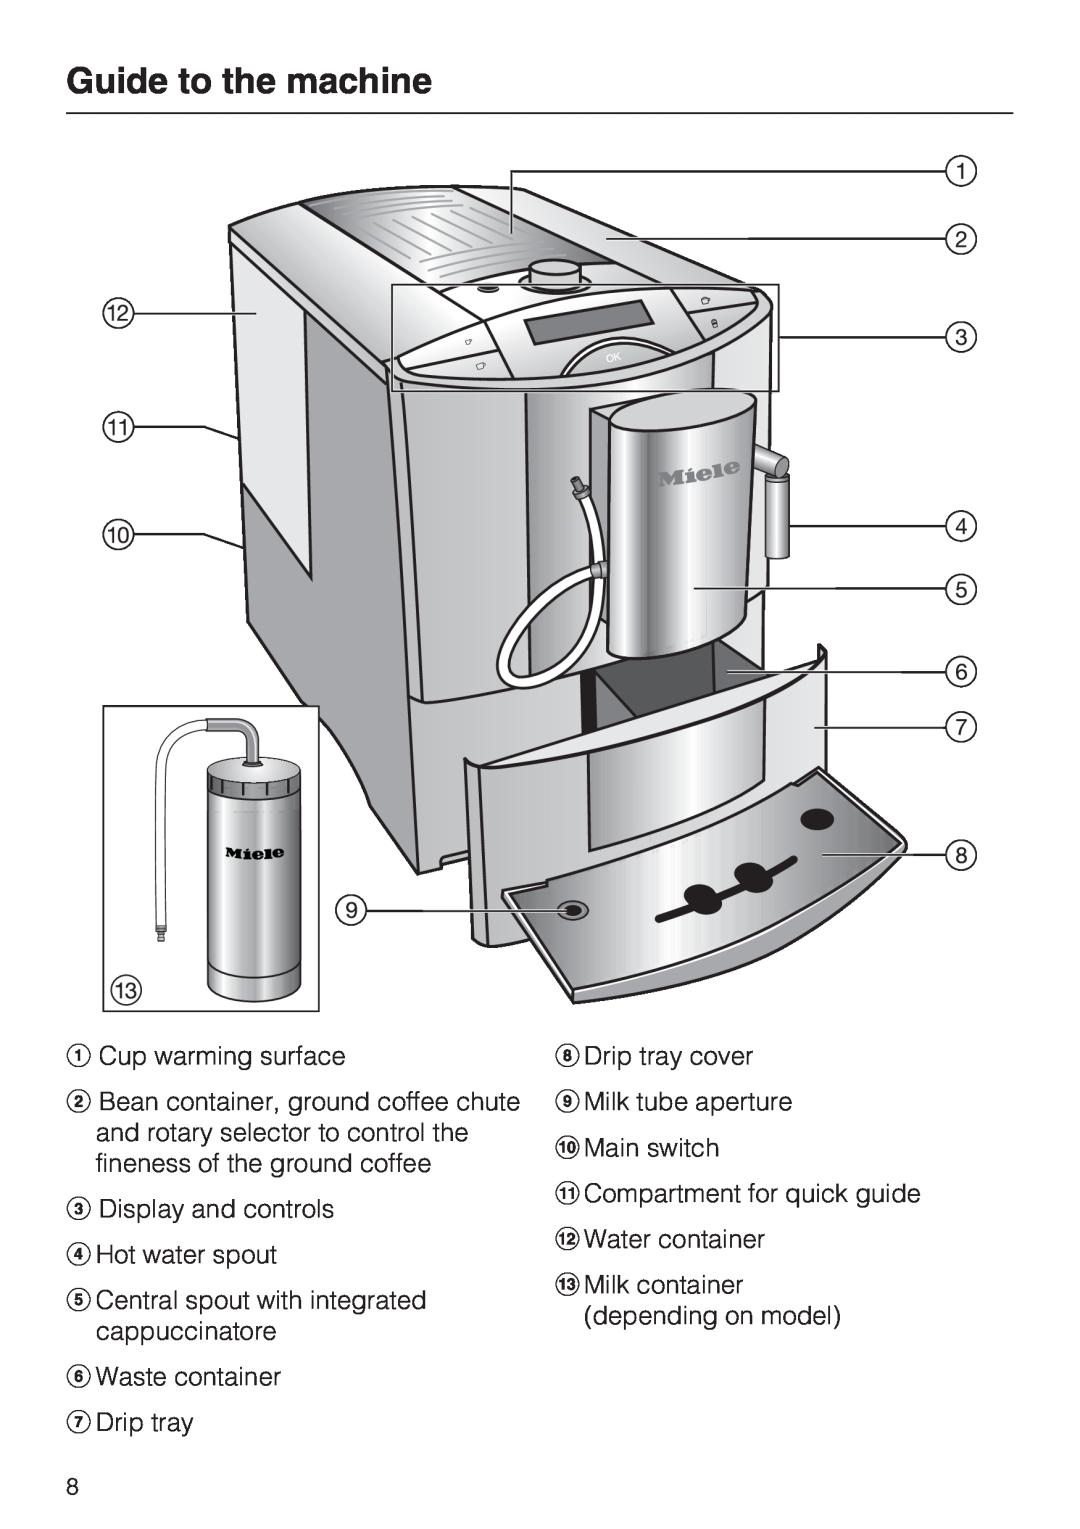 Miele CM 5200 manual Guide to the machine, aCup warming surface, cDisplay and controls dHot water spout 